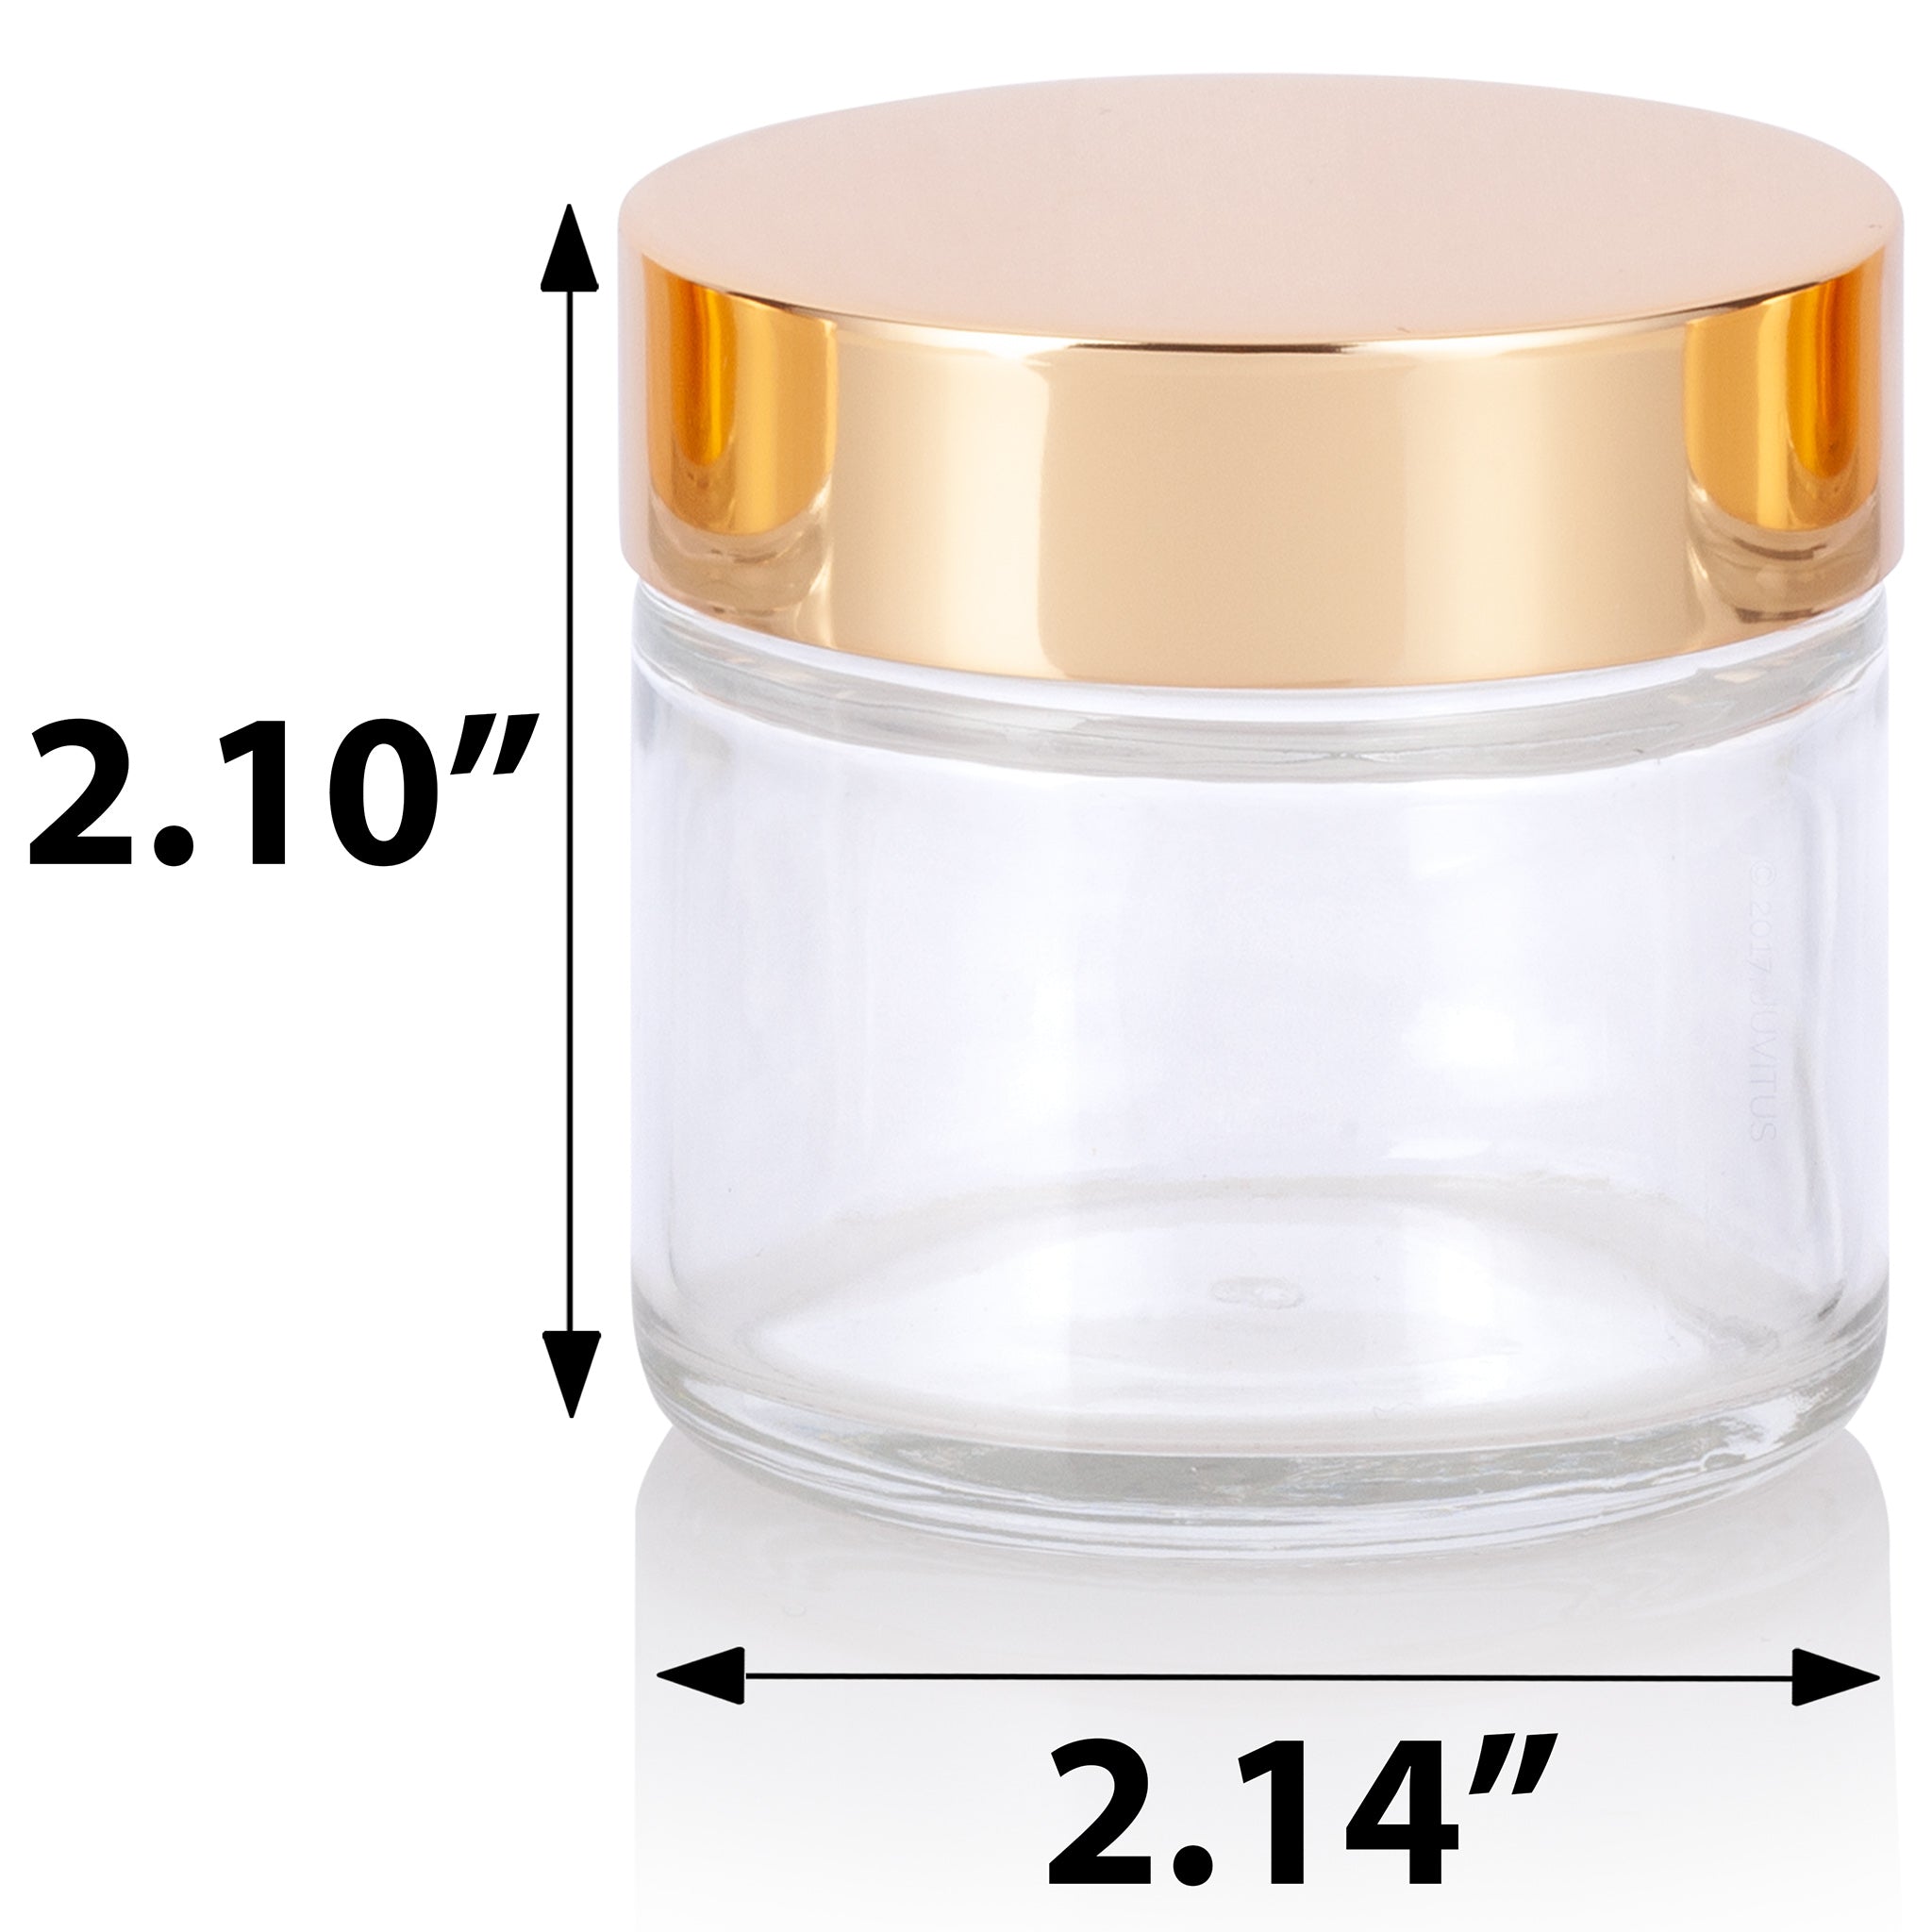 16 Oz. CLEAR GLASS Jar Straight Sided With Beautiful Gold Lids